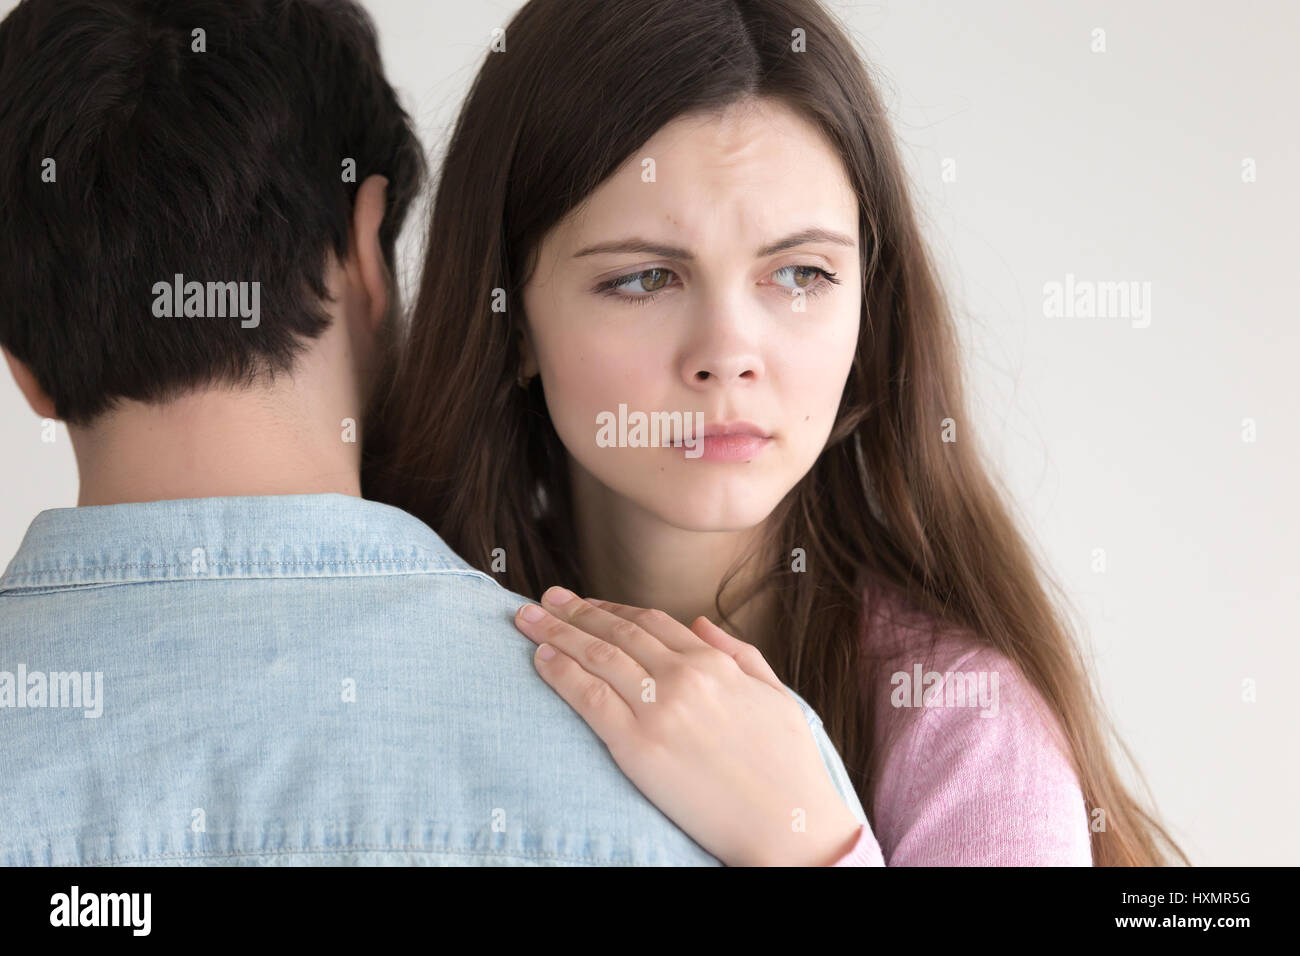 Attractive young woman embracing man, girl looking serious and w Stock Photo